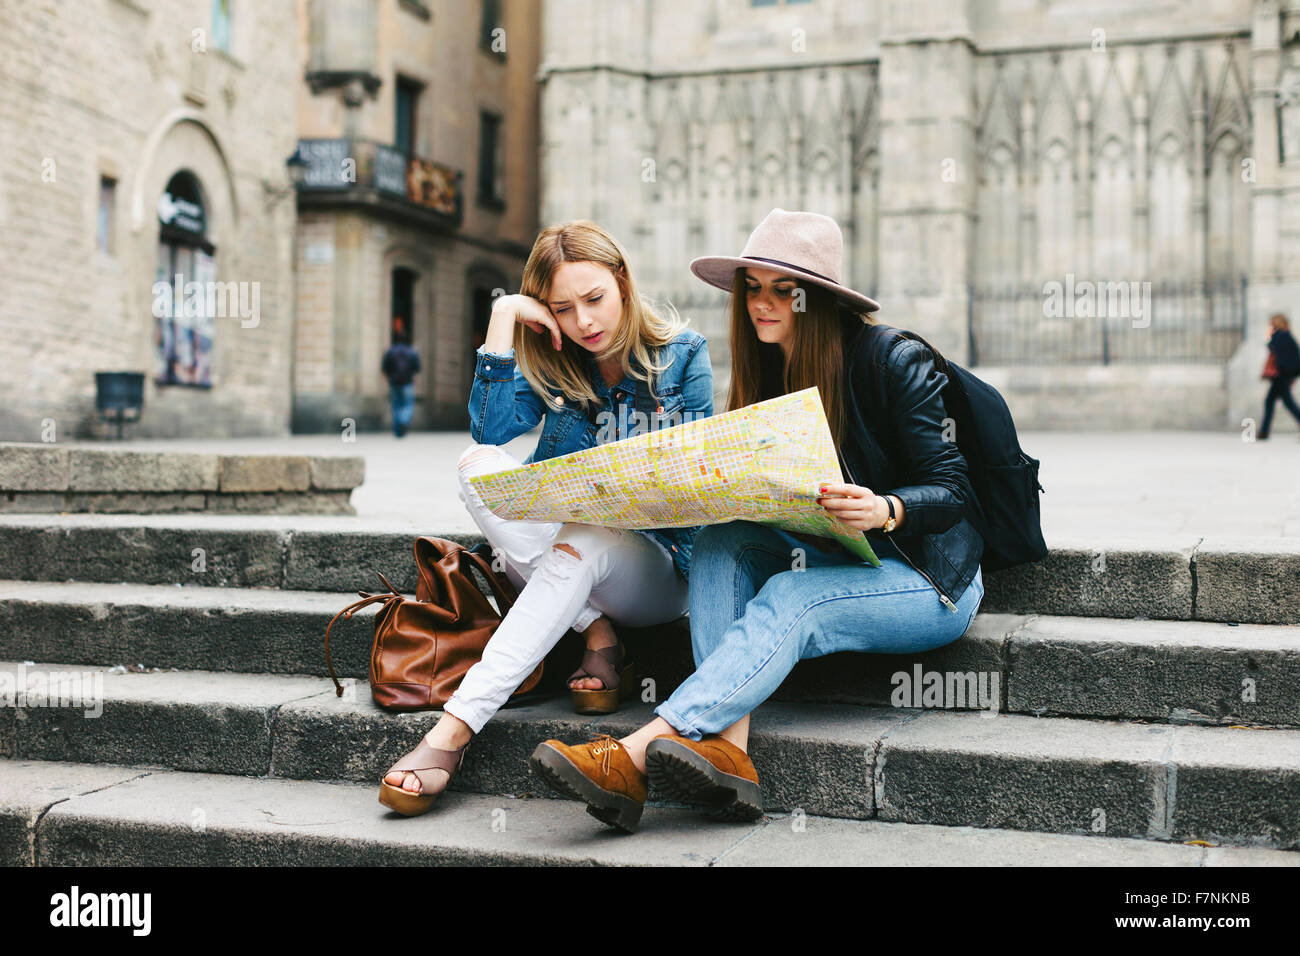 Spain, Barcelona, two young women reading map on stairs Stock Photo